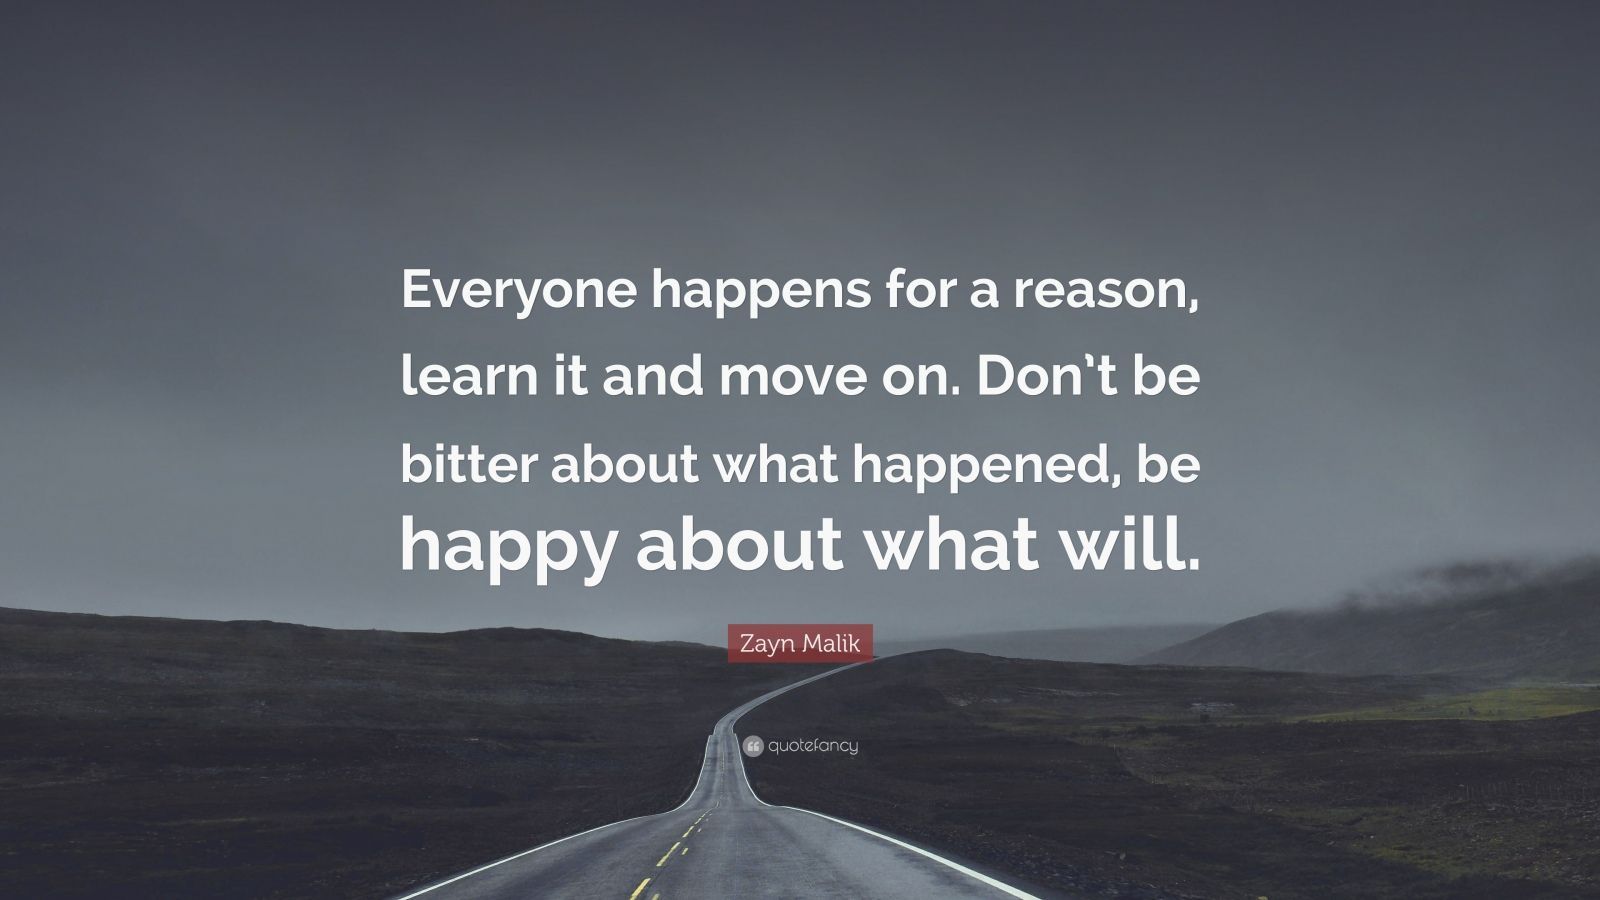 Zayn Malik Quote: “Everyone happens for a reason, learn it and move on. Don't be bitter about what happened, be happy about what will.” (12 wallpaper)